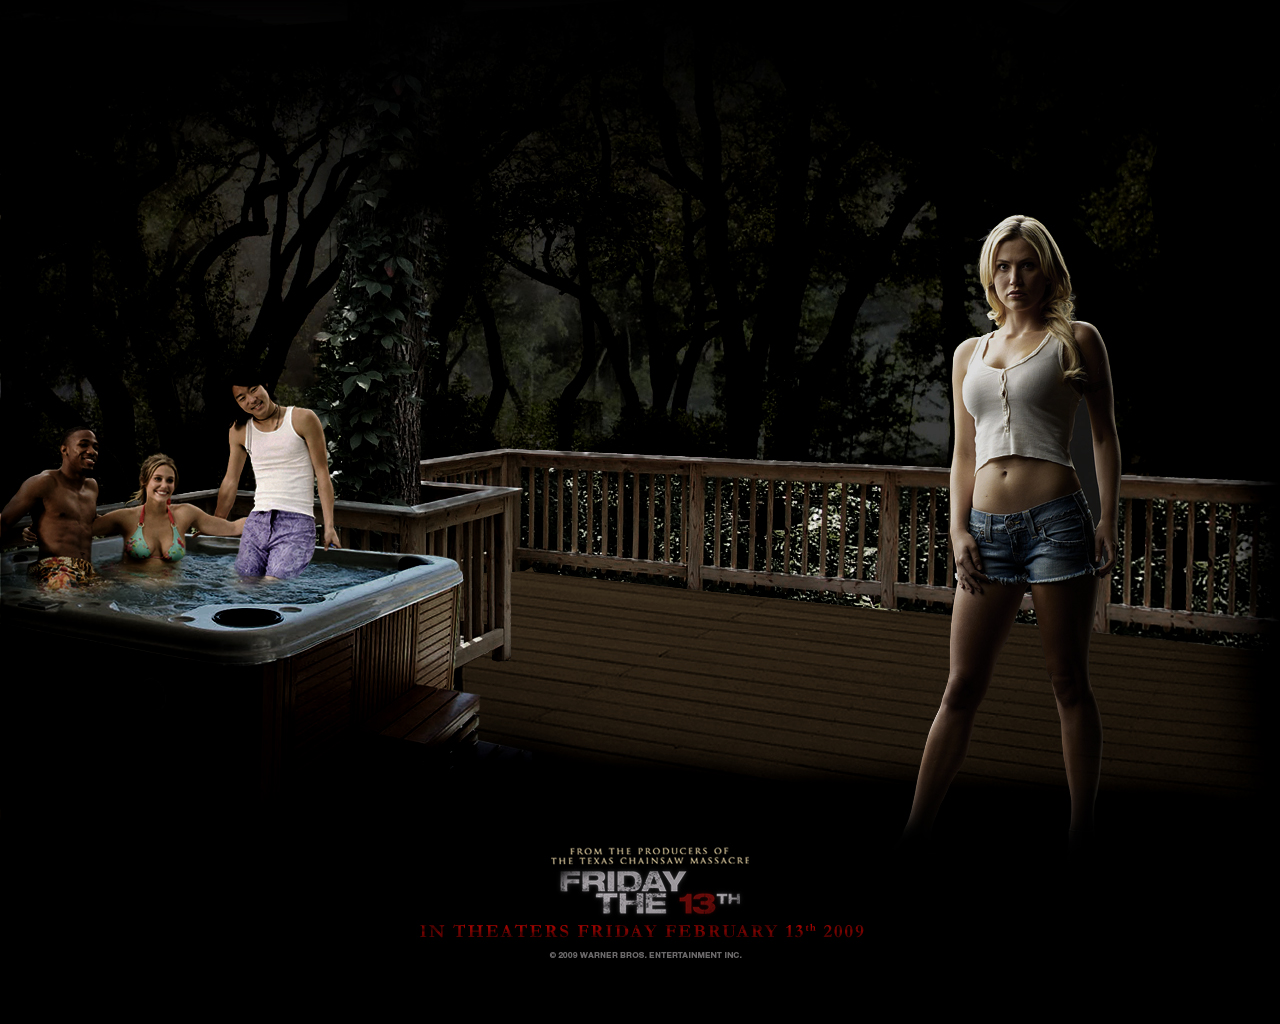 Download High quality Friday The 13th wallpaper / Movies / 1280x1024